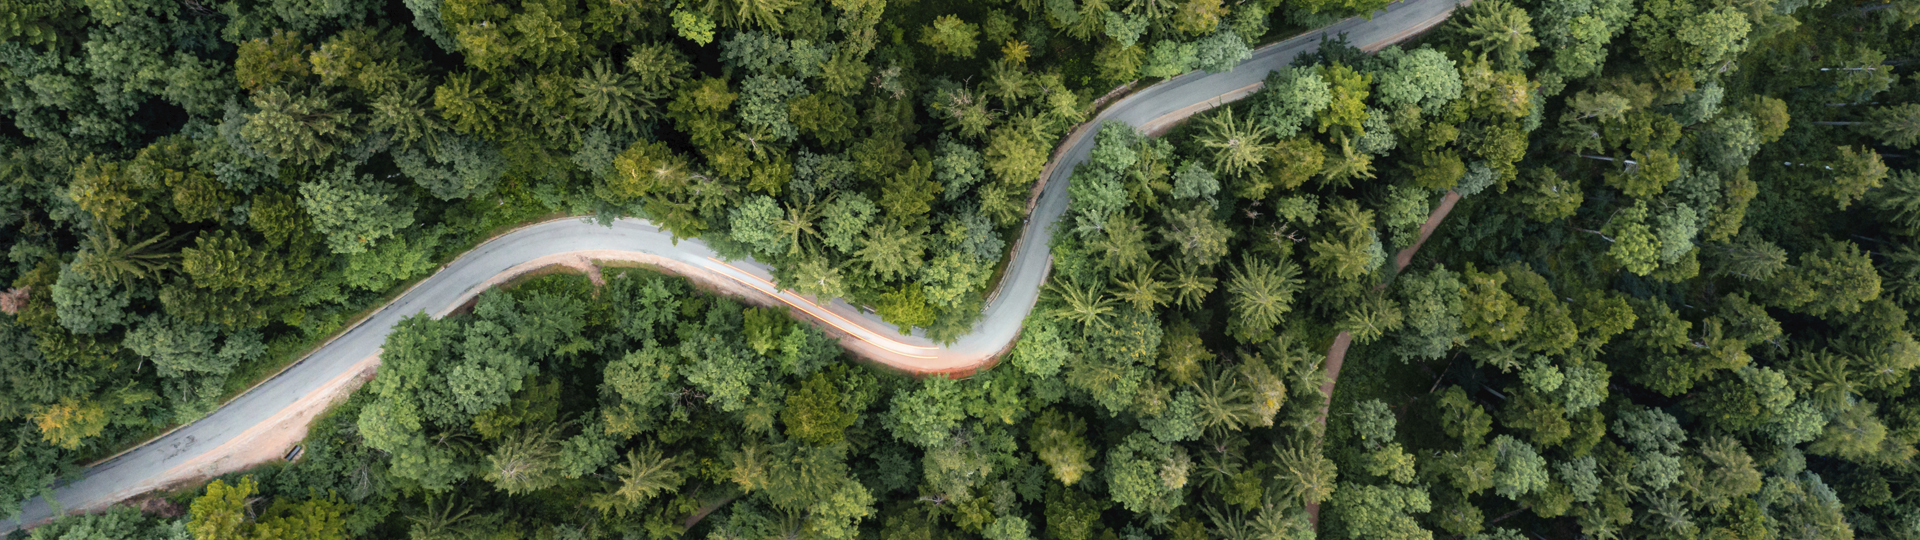 Bird's Eye View of a Road in a Forest